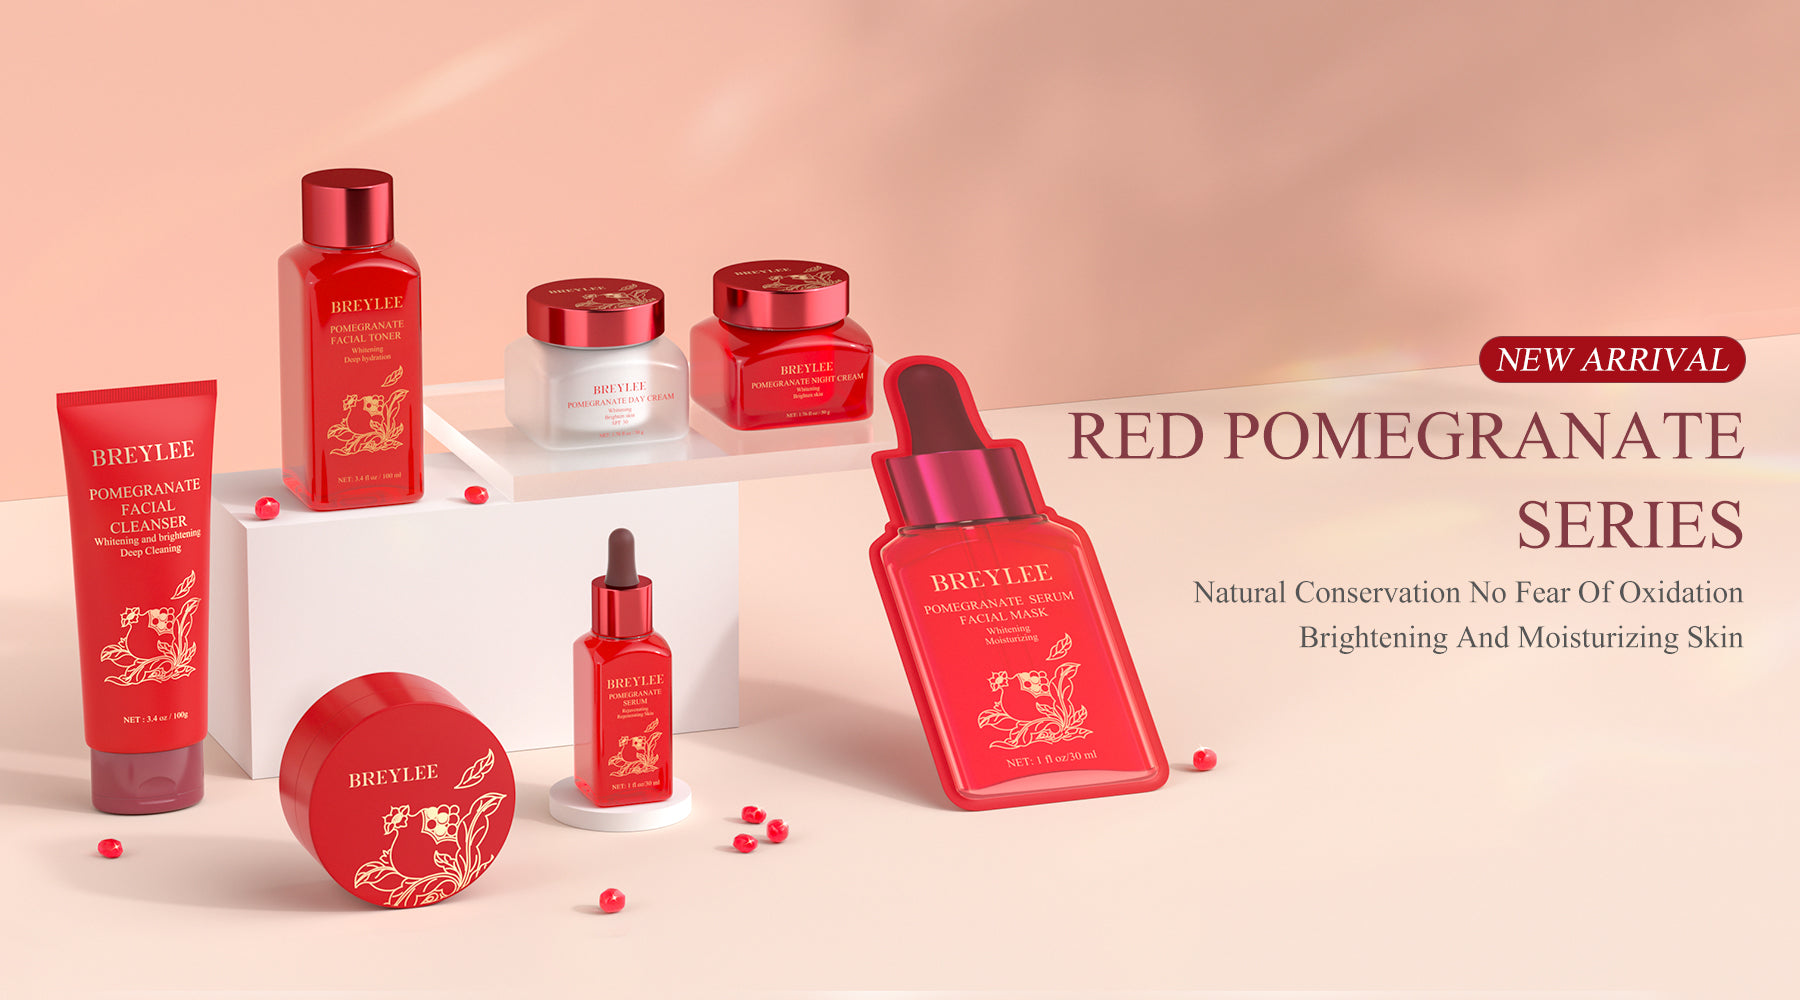 The beauty value of red pomegranate